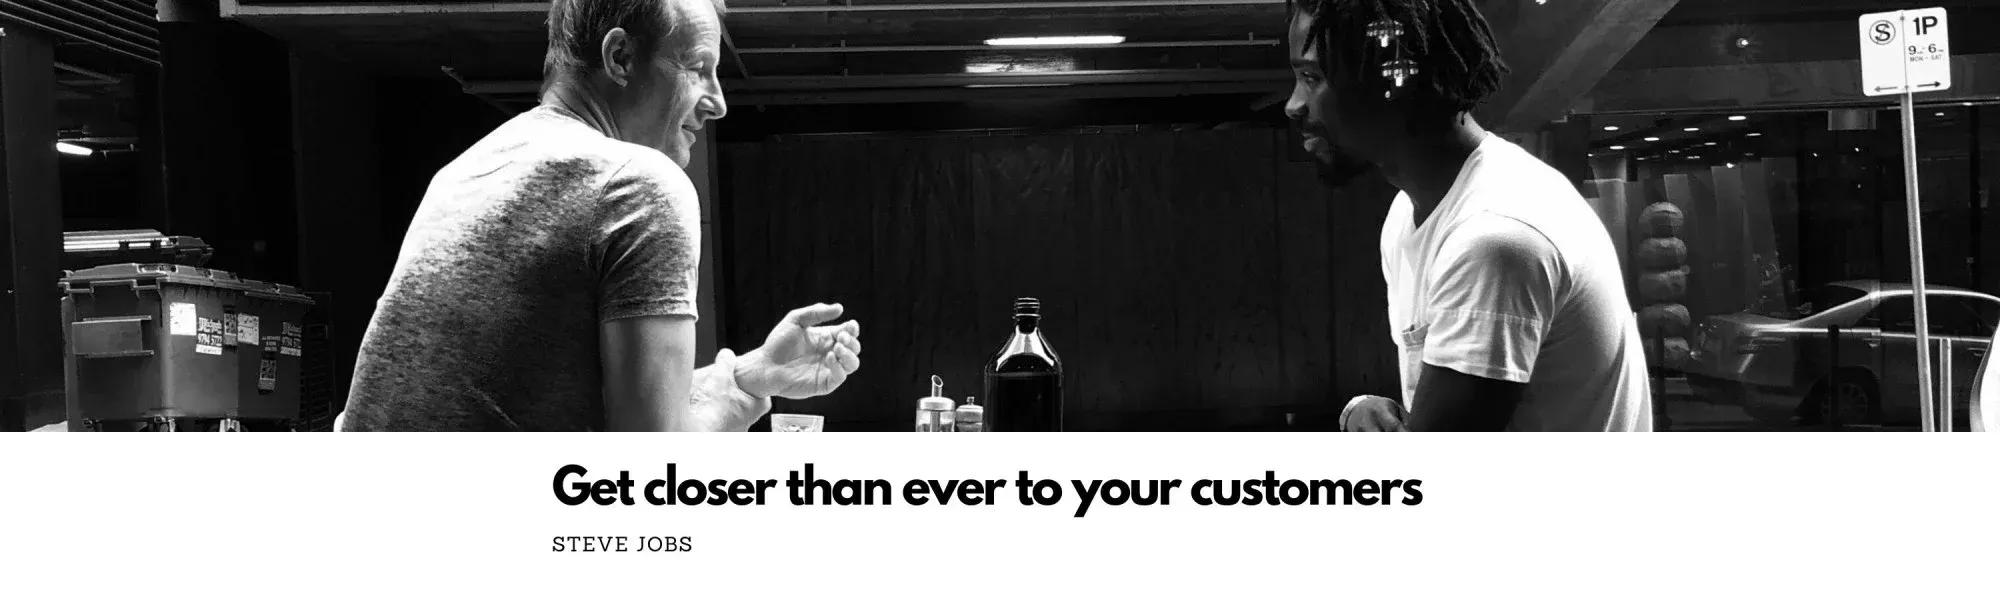 What do customers want? - The unattended mantra!